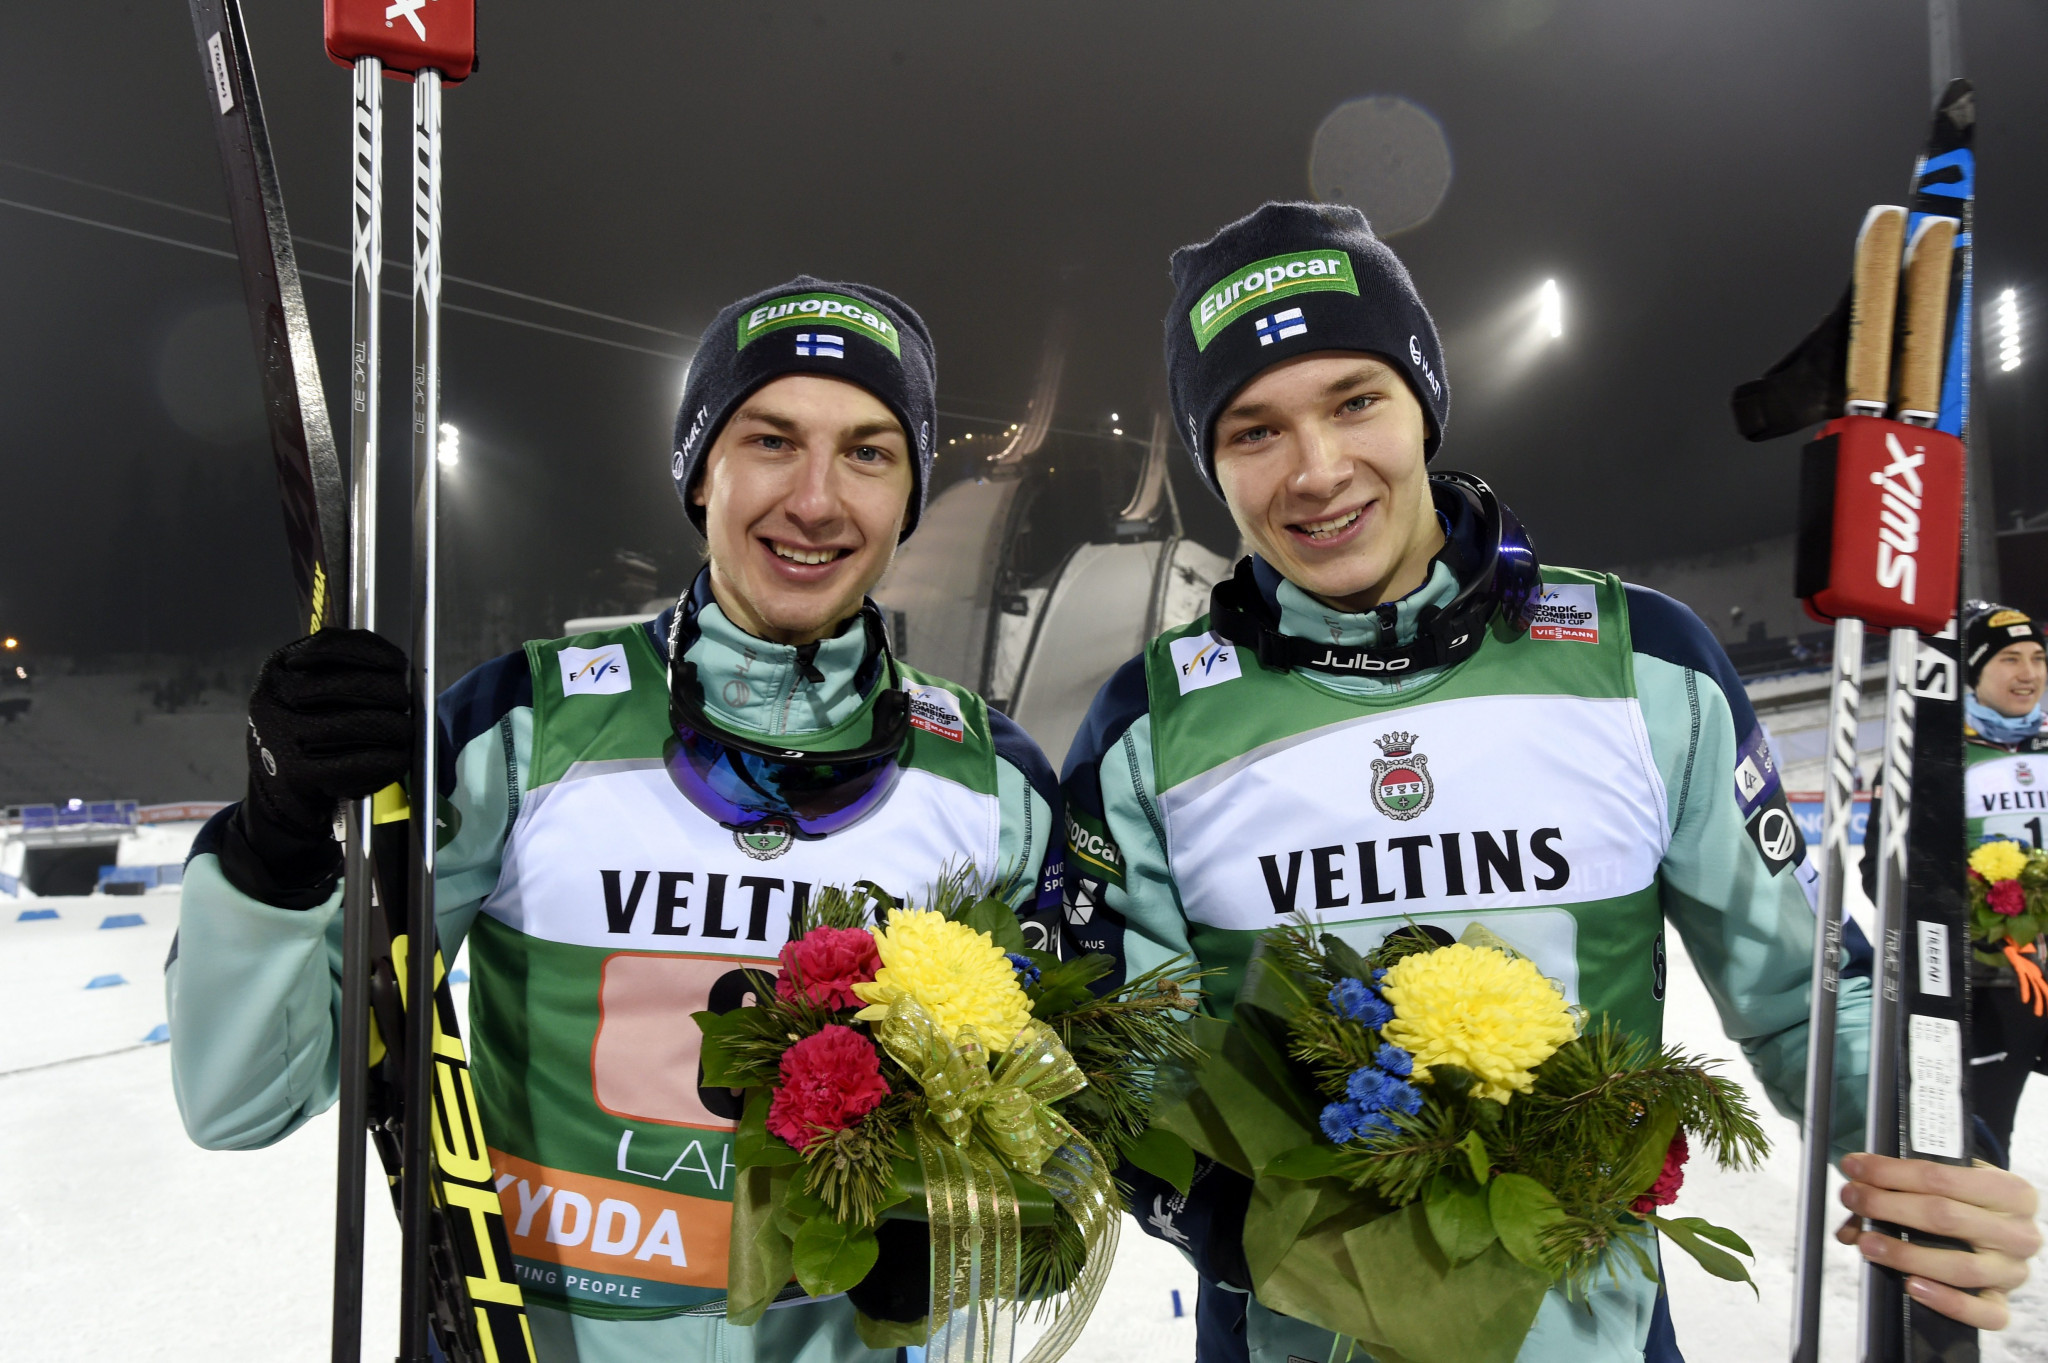 Ilkka Herola and Eero Hirvonen won the team sprint event in front of a home crowd ©Getty Images